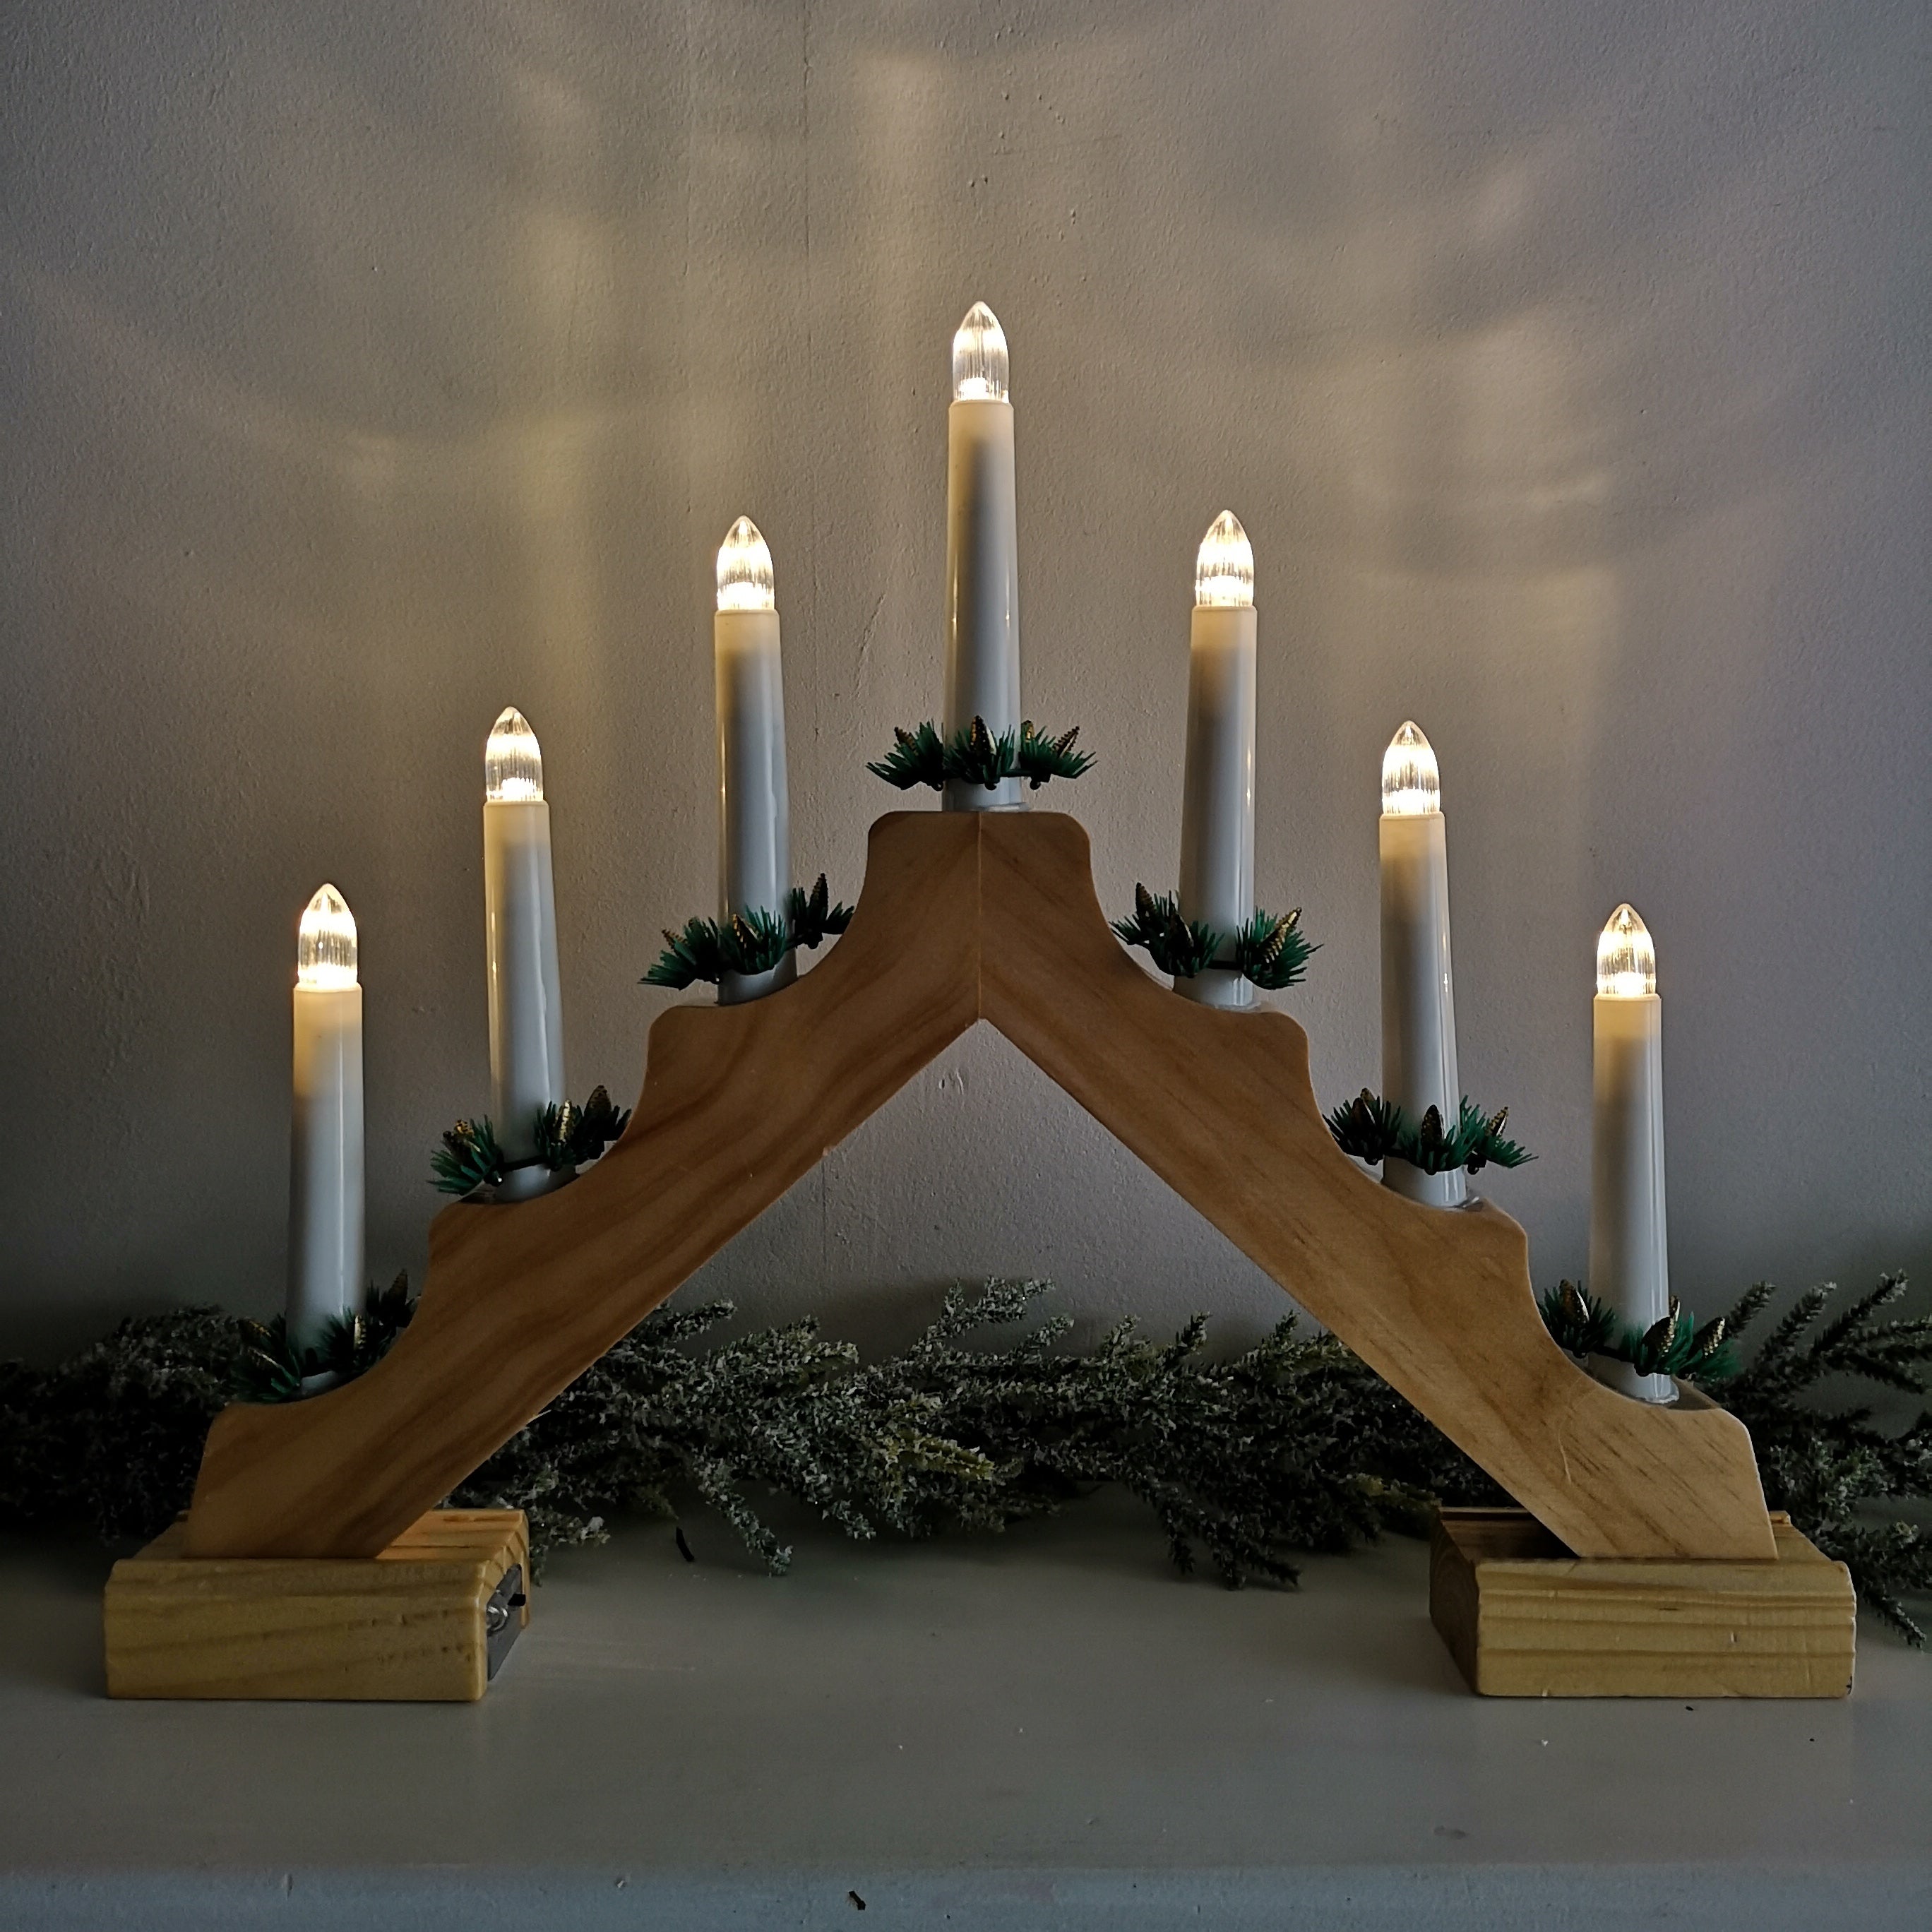 40cm Premier Christmas Candlebridge with 7 Bulbs in Light Wood Battery Operated